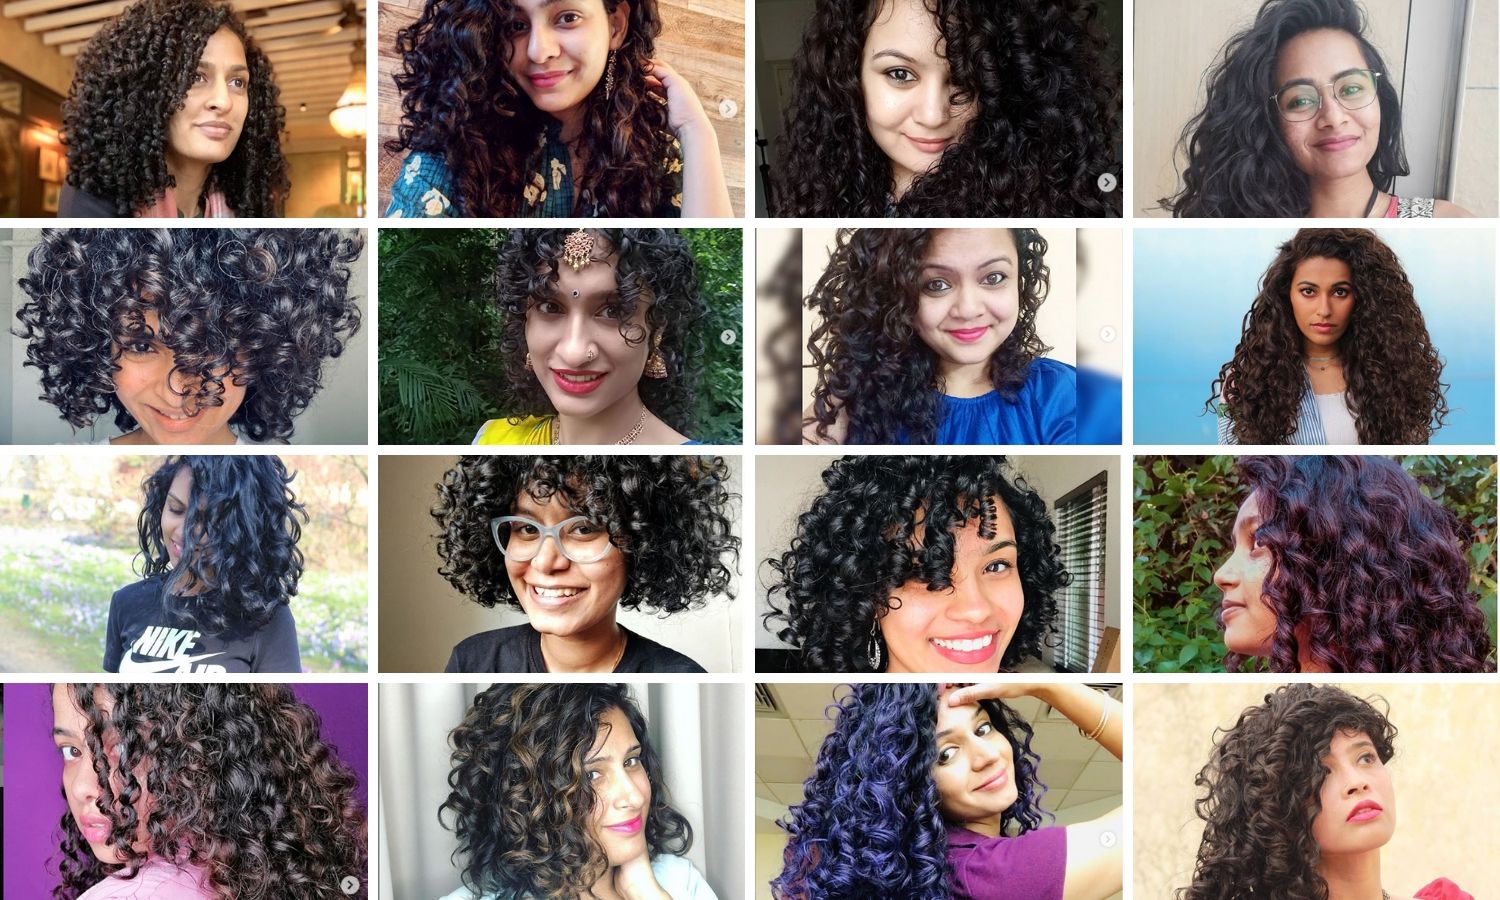 20 Stunning Curly Hairstyles Ideas For Indian Wedding Function | Curly  wedding hair, Curly hair women, Curly hair styles